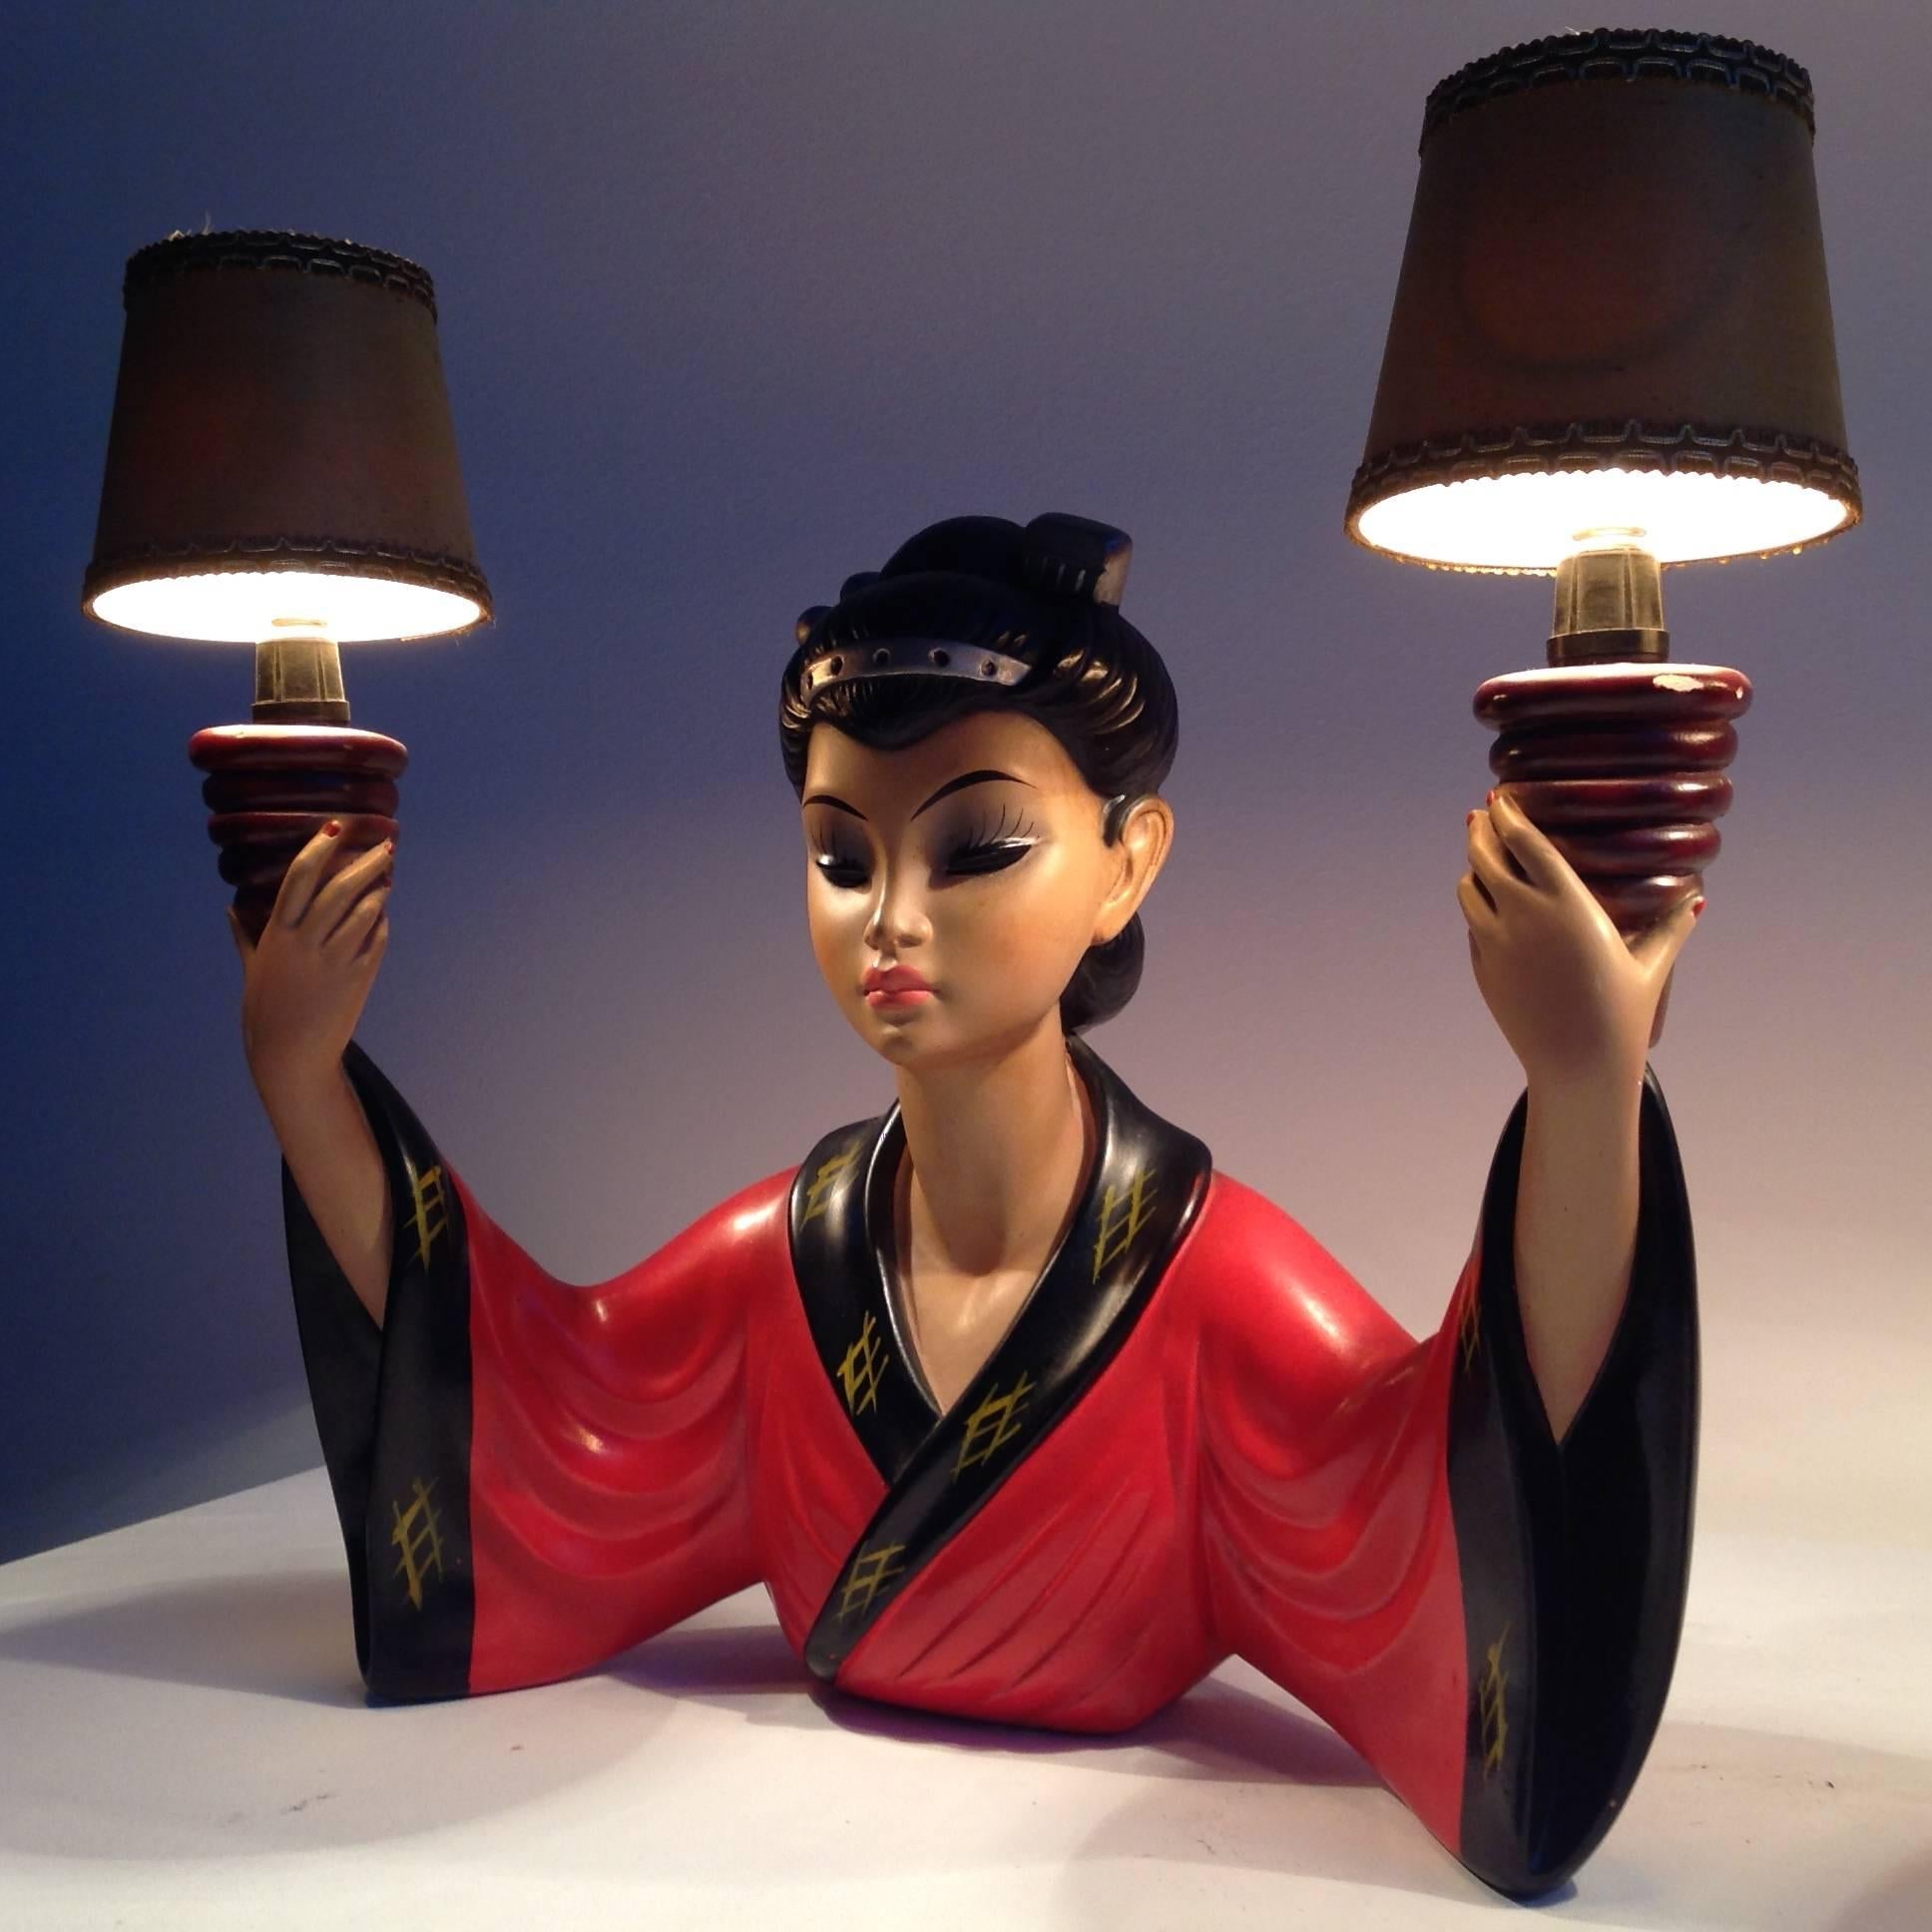 Made by Melani Salvatore (1902-1934).
One very rare table or wall lamp made in plater, super decorative and beautiful on the wall or sideboard.
Are complete and in very good original condition, including the two small lampshades (these are ok, but